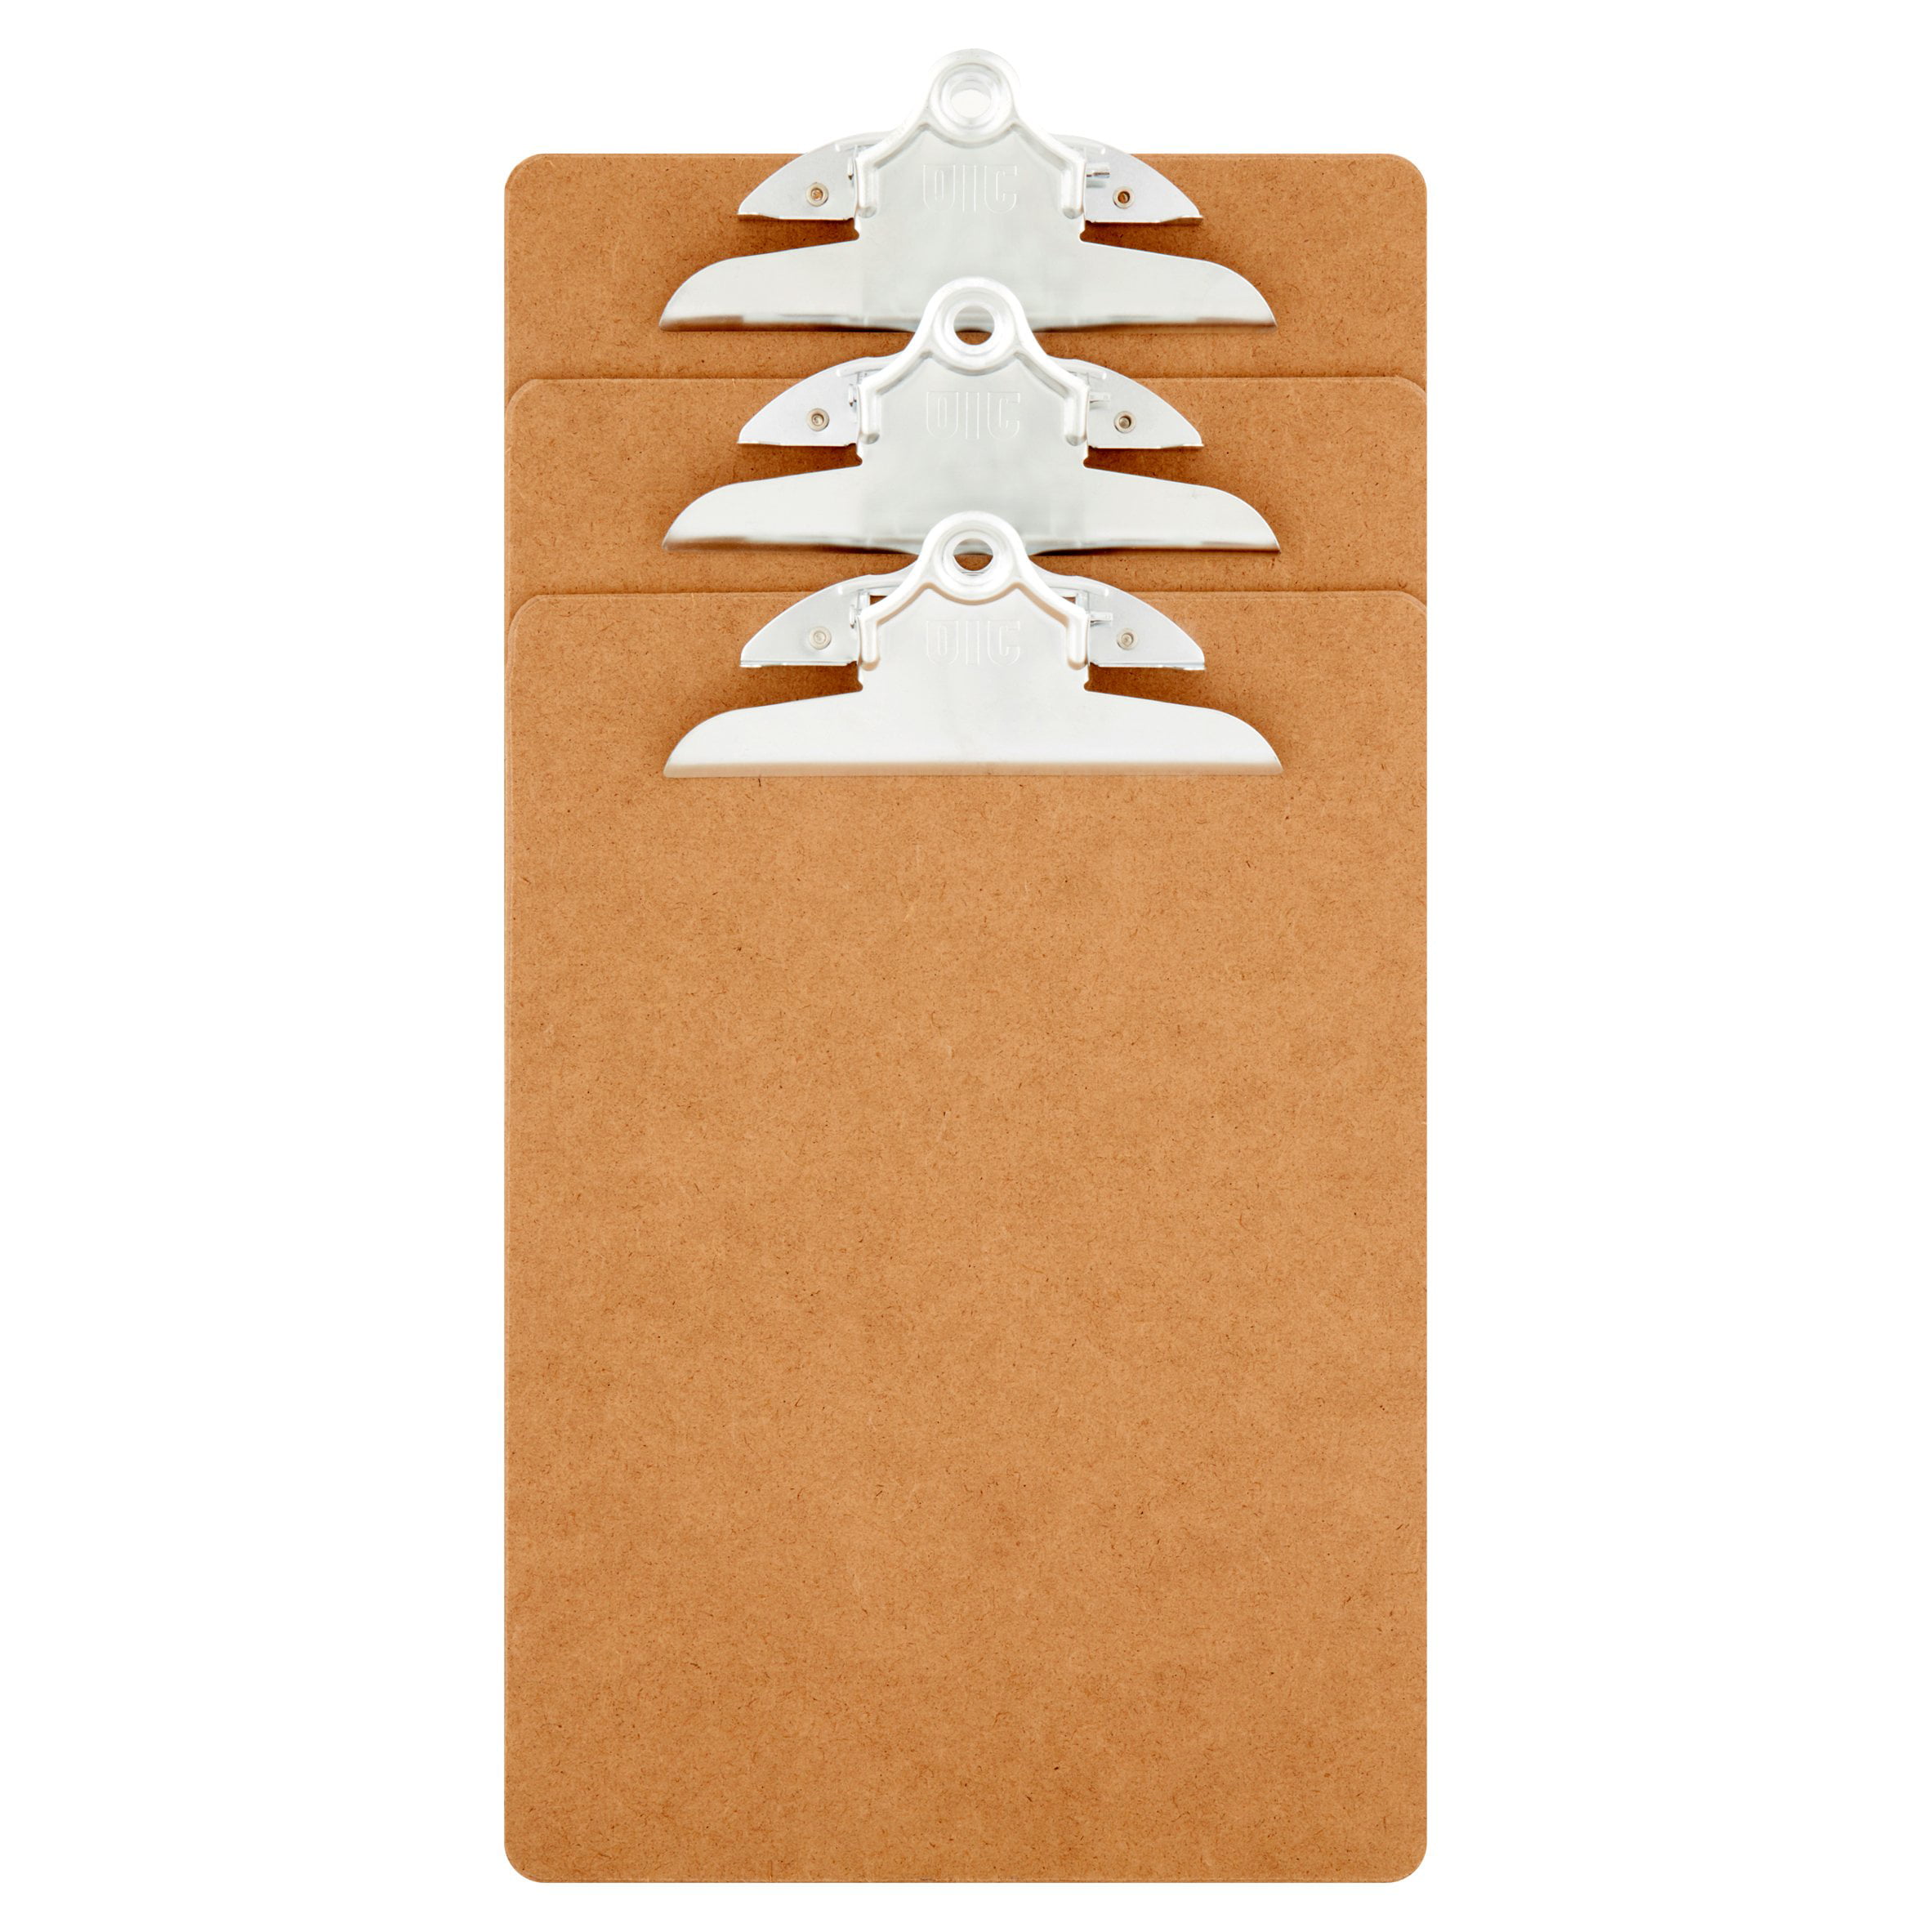 Letter Size 3 Pack Officemate Clipboard 83130